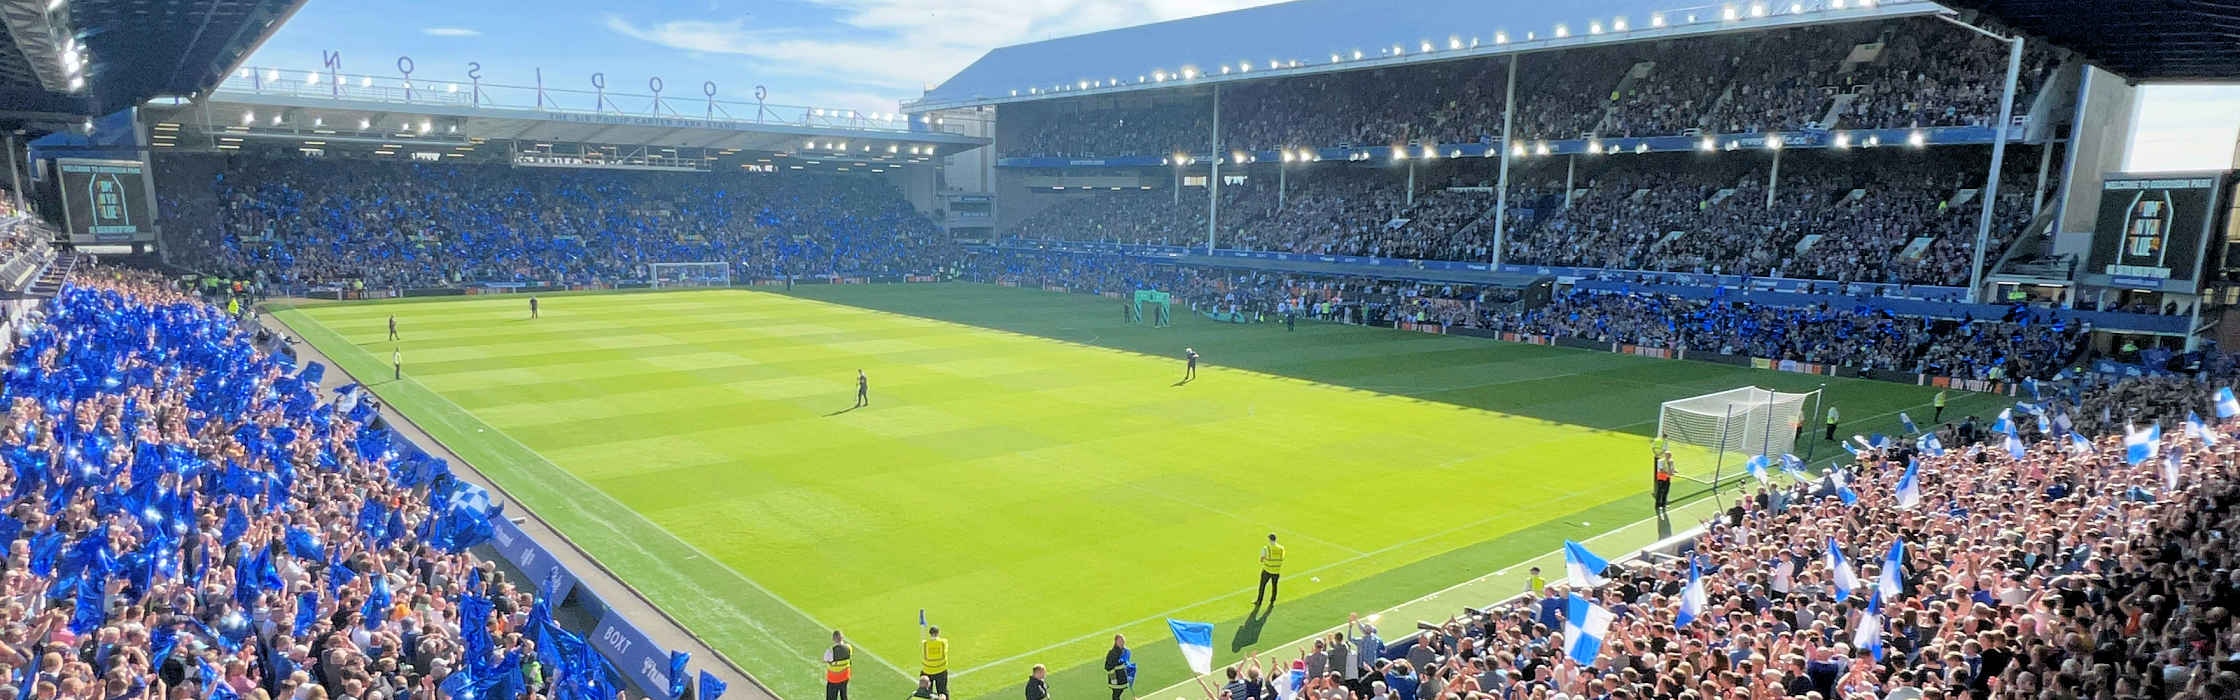 What's On at Goodison Park, Liverpool